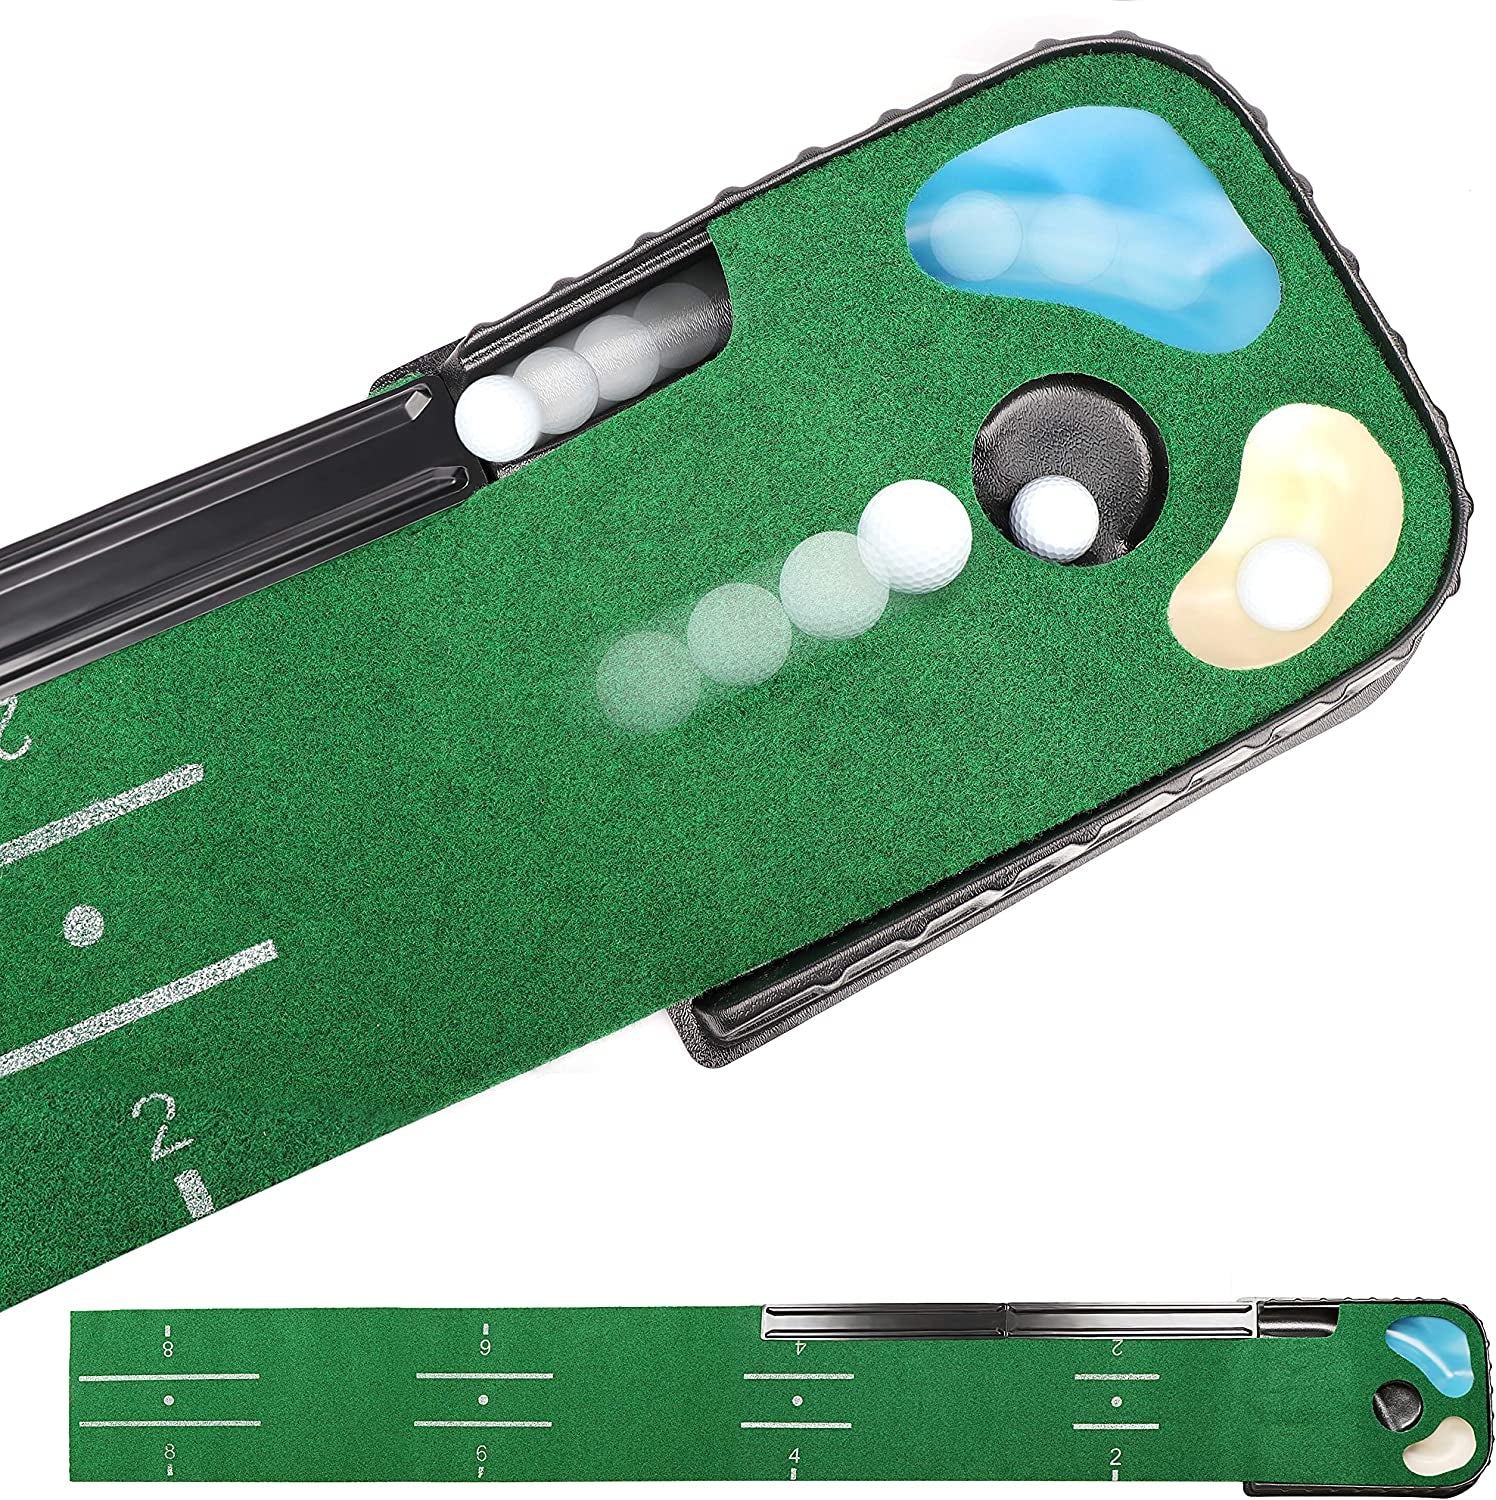 Hazard and Bunker Golf Putting Mat | True Roll Surface with Non Slip Backing Golf Putting Green